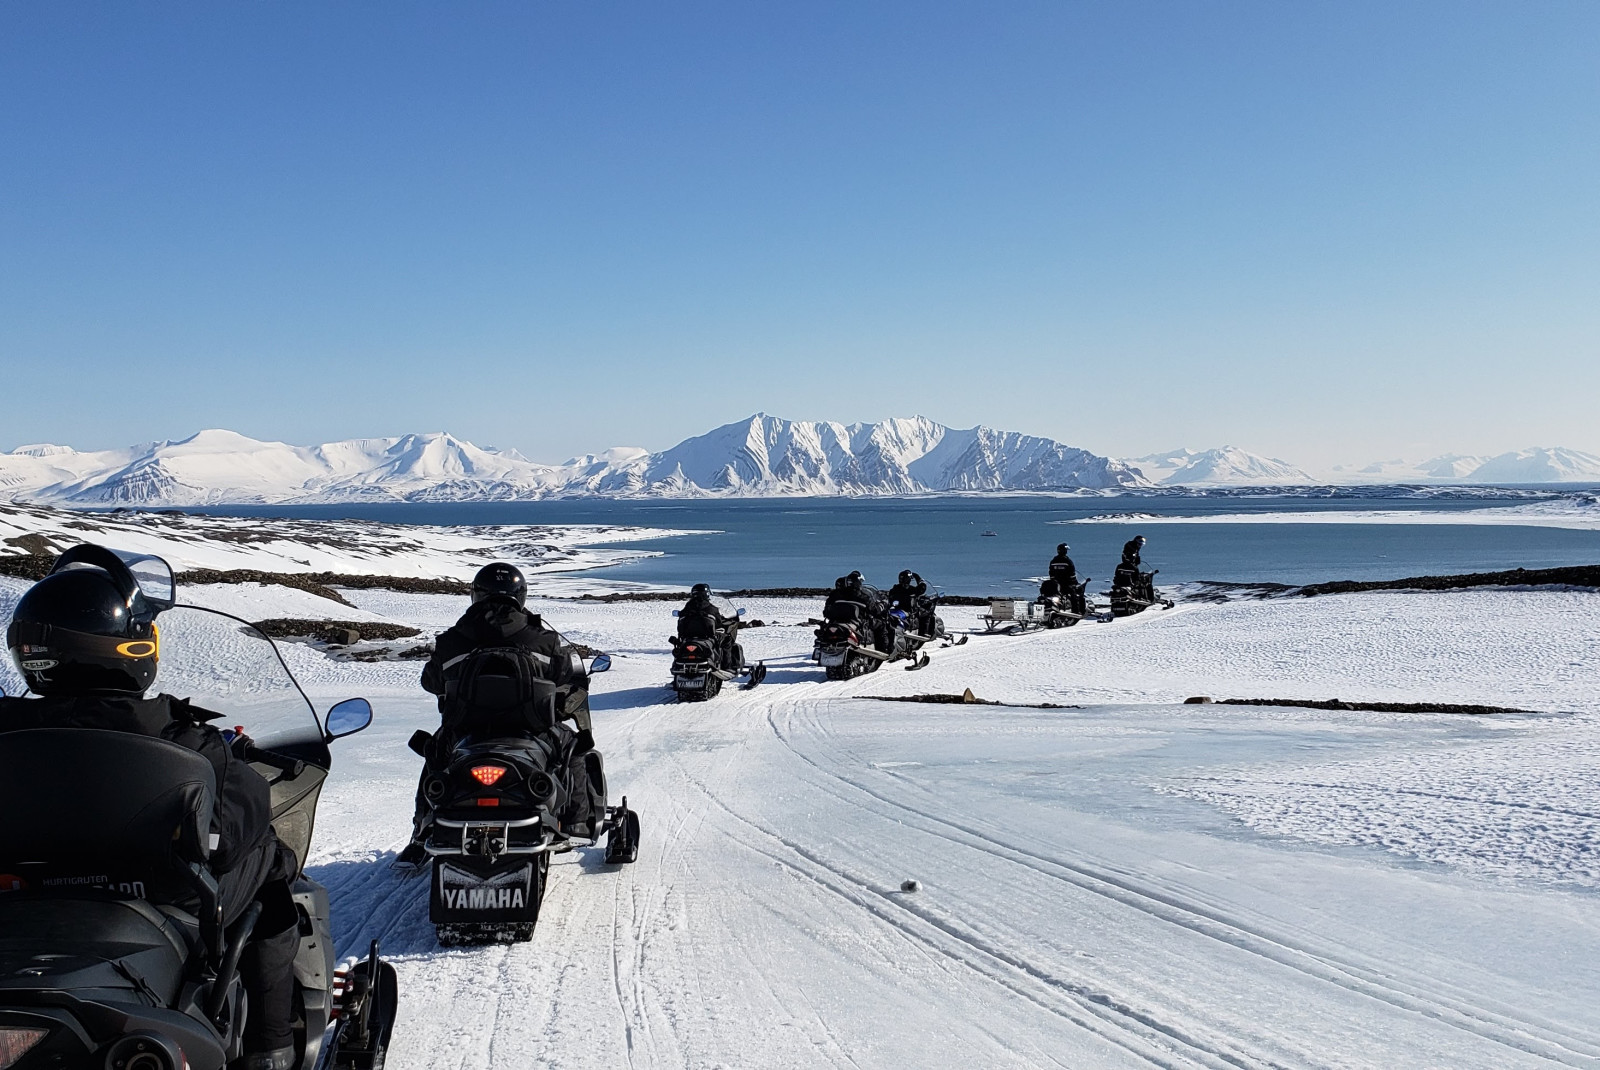 People wearing black jackets riding on snowmobiles across snowy landscape during daytime